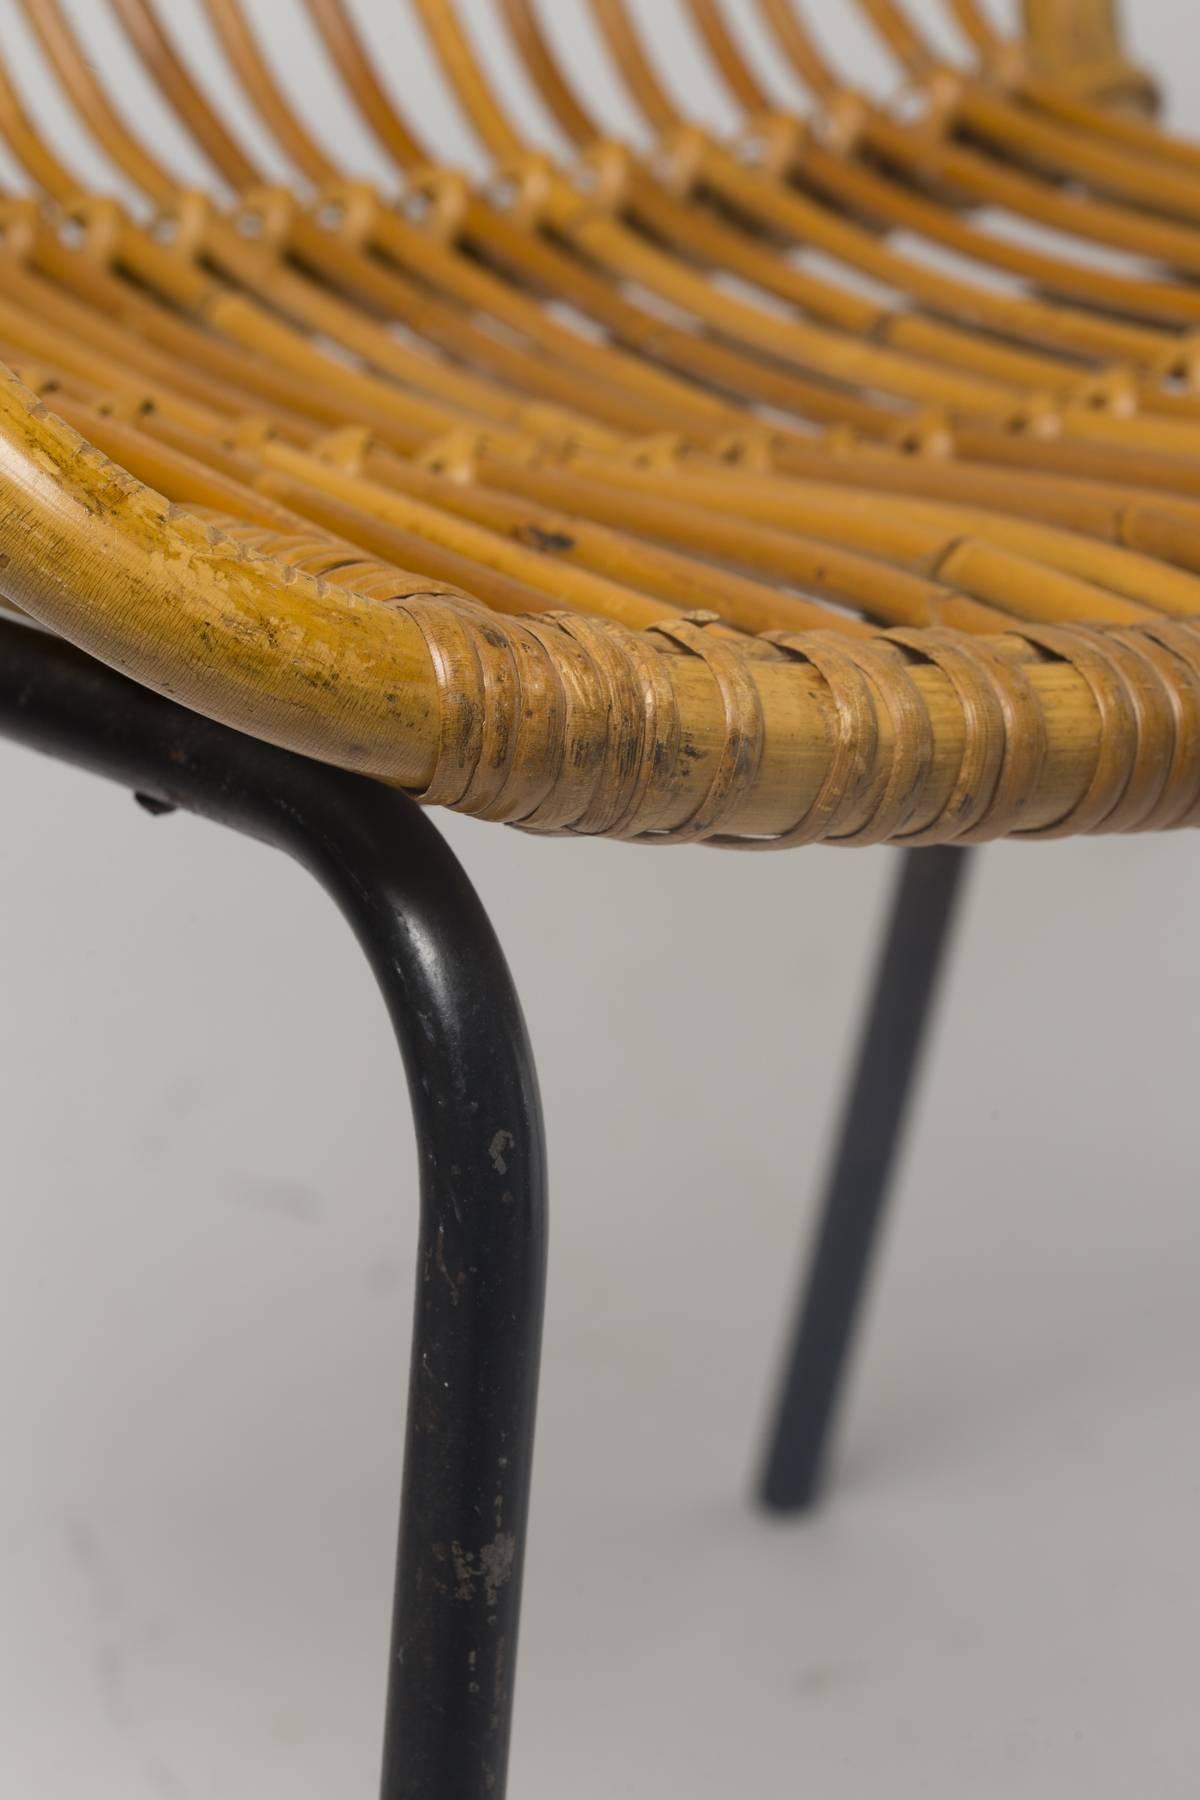 Set of Six Rattan Chairs on Black Lacquered Iron Bases, Netherlands, 1950 Period 5